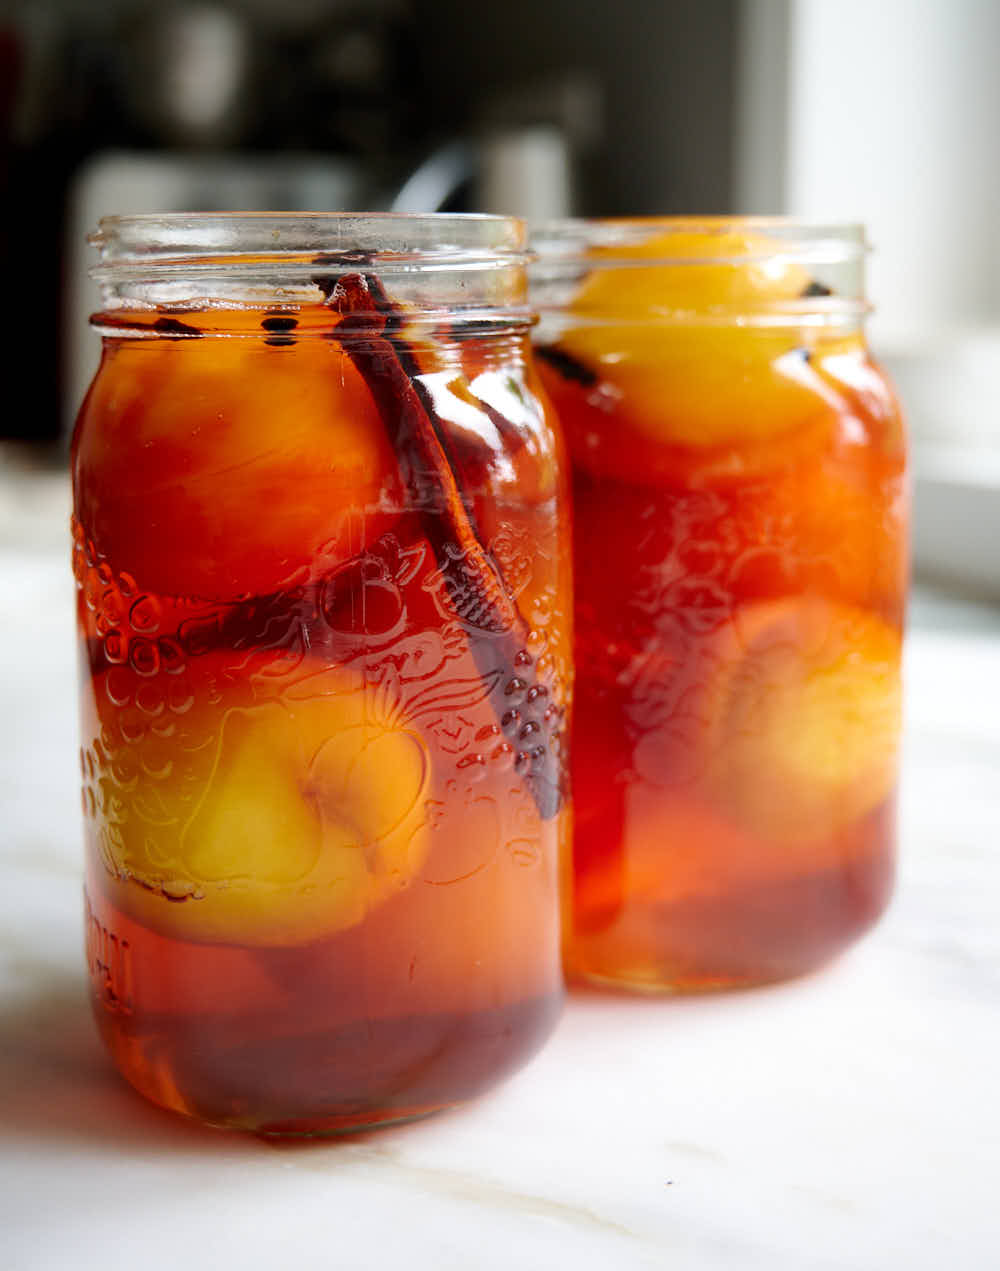 Pickled peaches in jars filled with pickling brine.